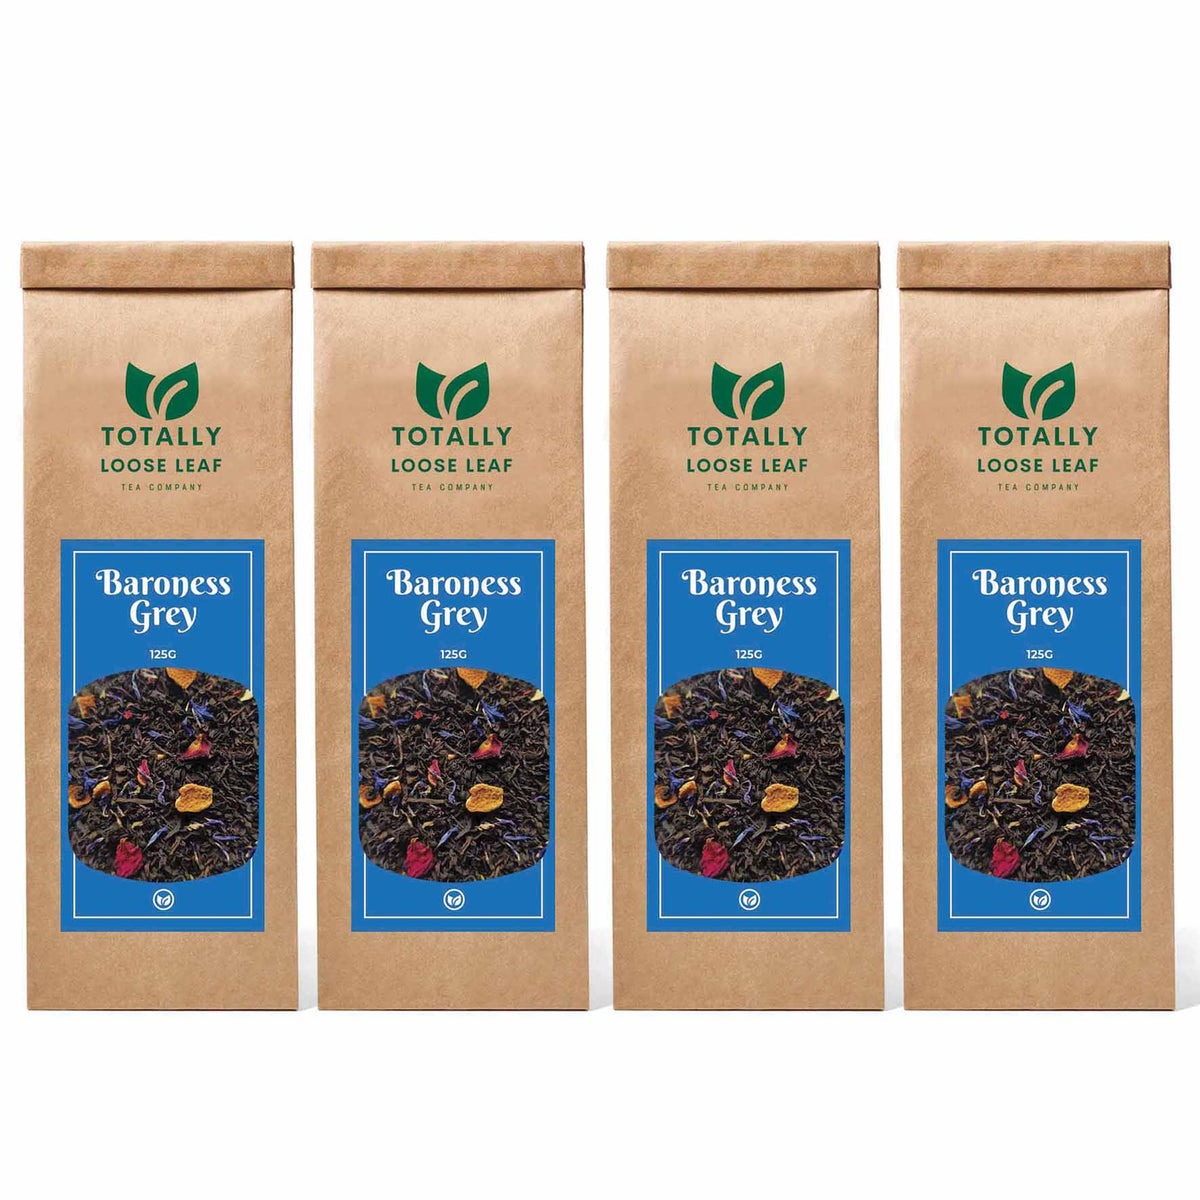 Baroness Grey Breakfast Loose Leaf Tea - four pouches